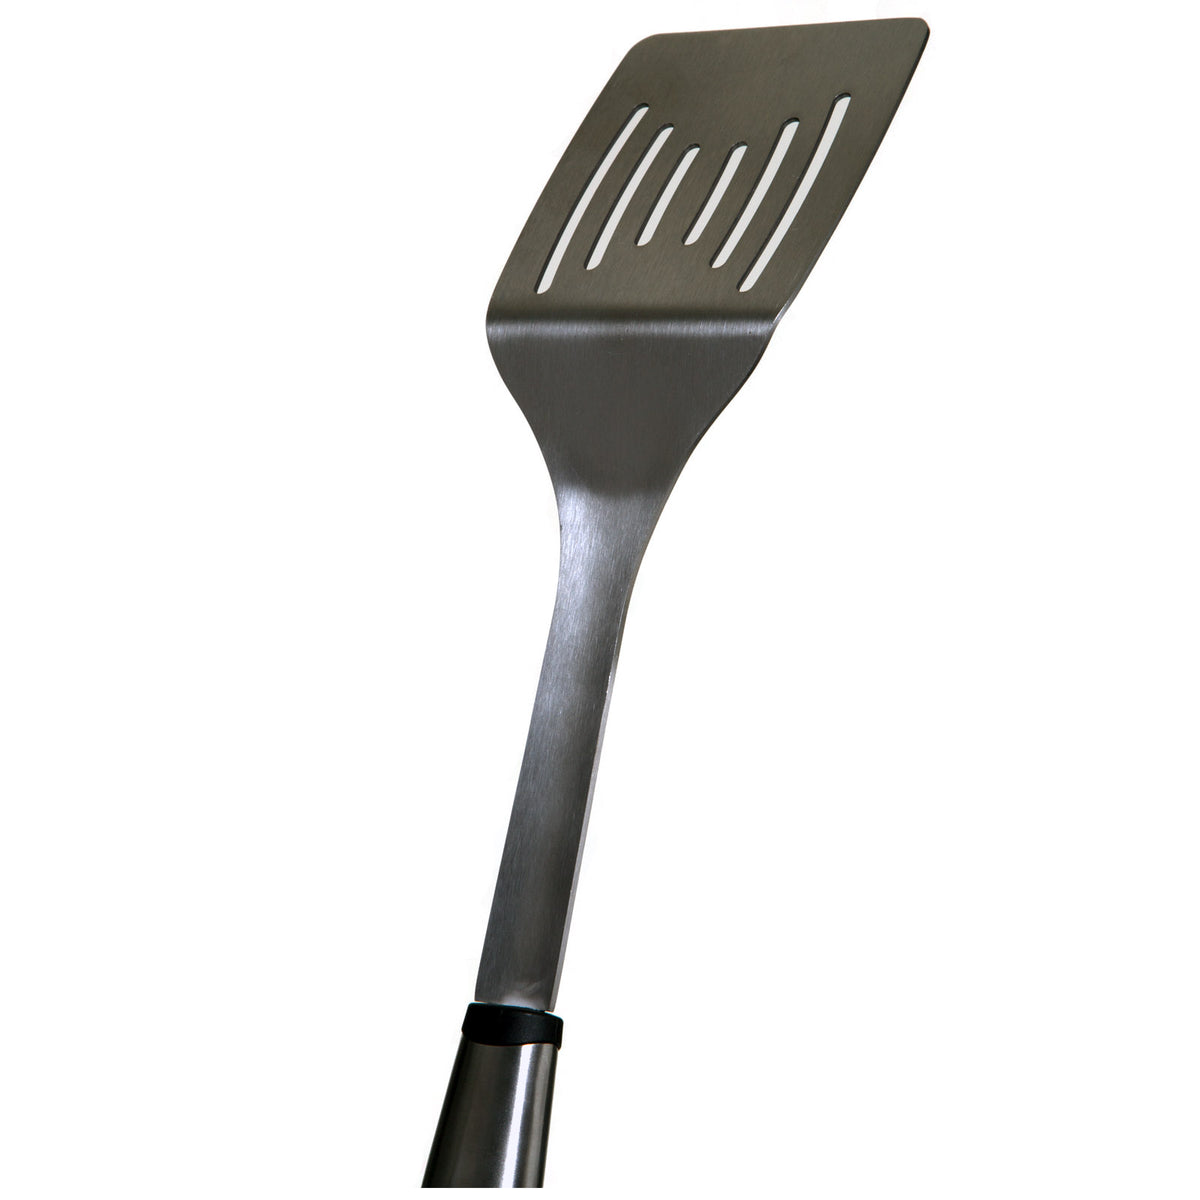 buy barbecue utensils, grills and outdoor cooking at cheap rate in bulk. wholesale & retail outdoor furniture & grills store.